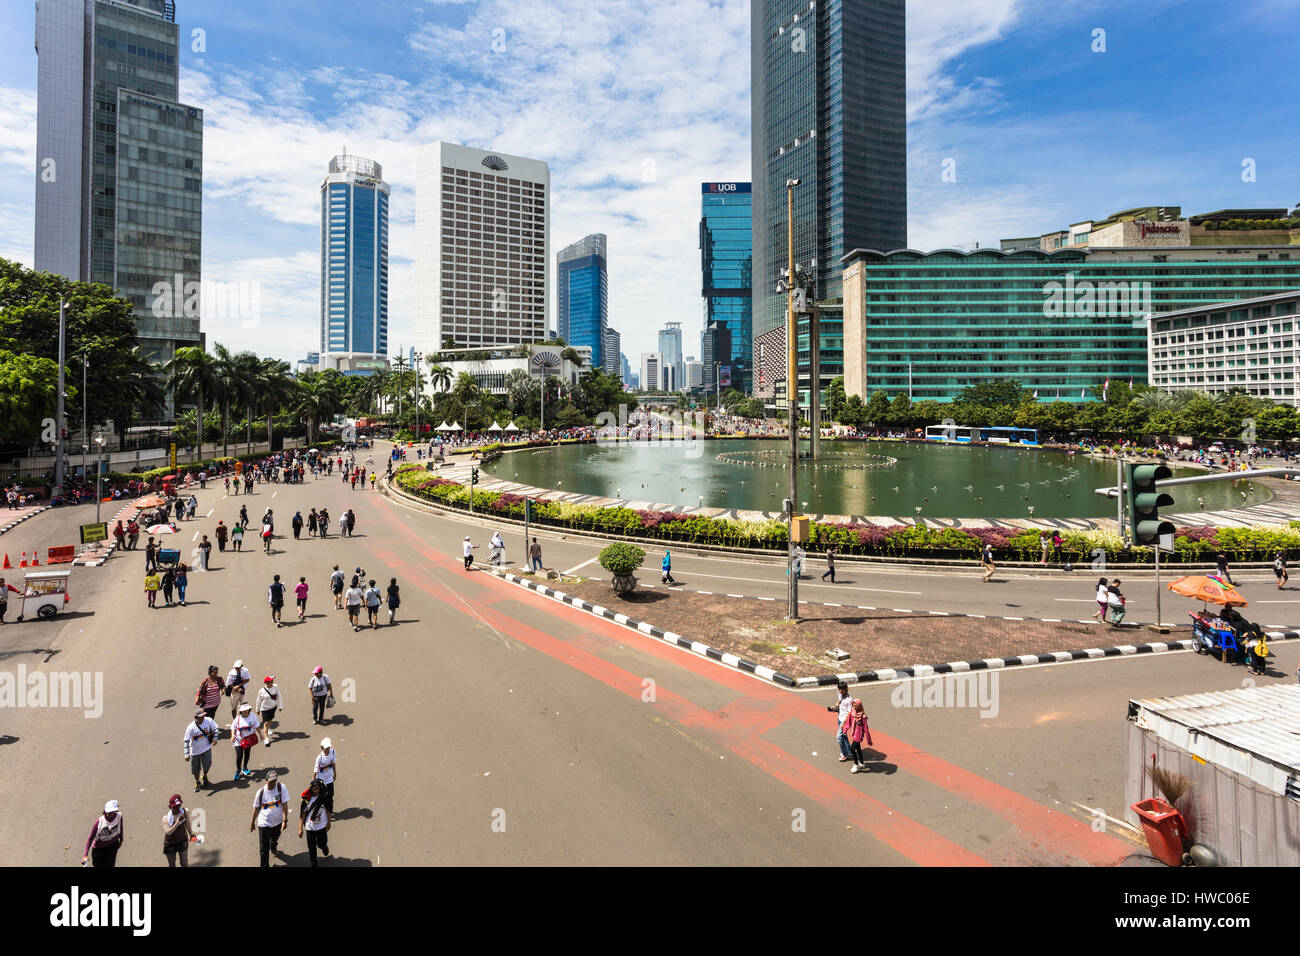 JAKARTA, INDONESIA - SEPTEMBER 25, 2016: People enjoy the car free day, which happens every Sunday morning, on the Sudirman avenue in the heart of Ind Stock Photo